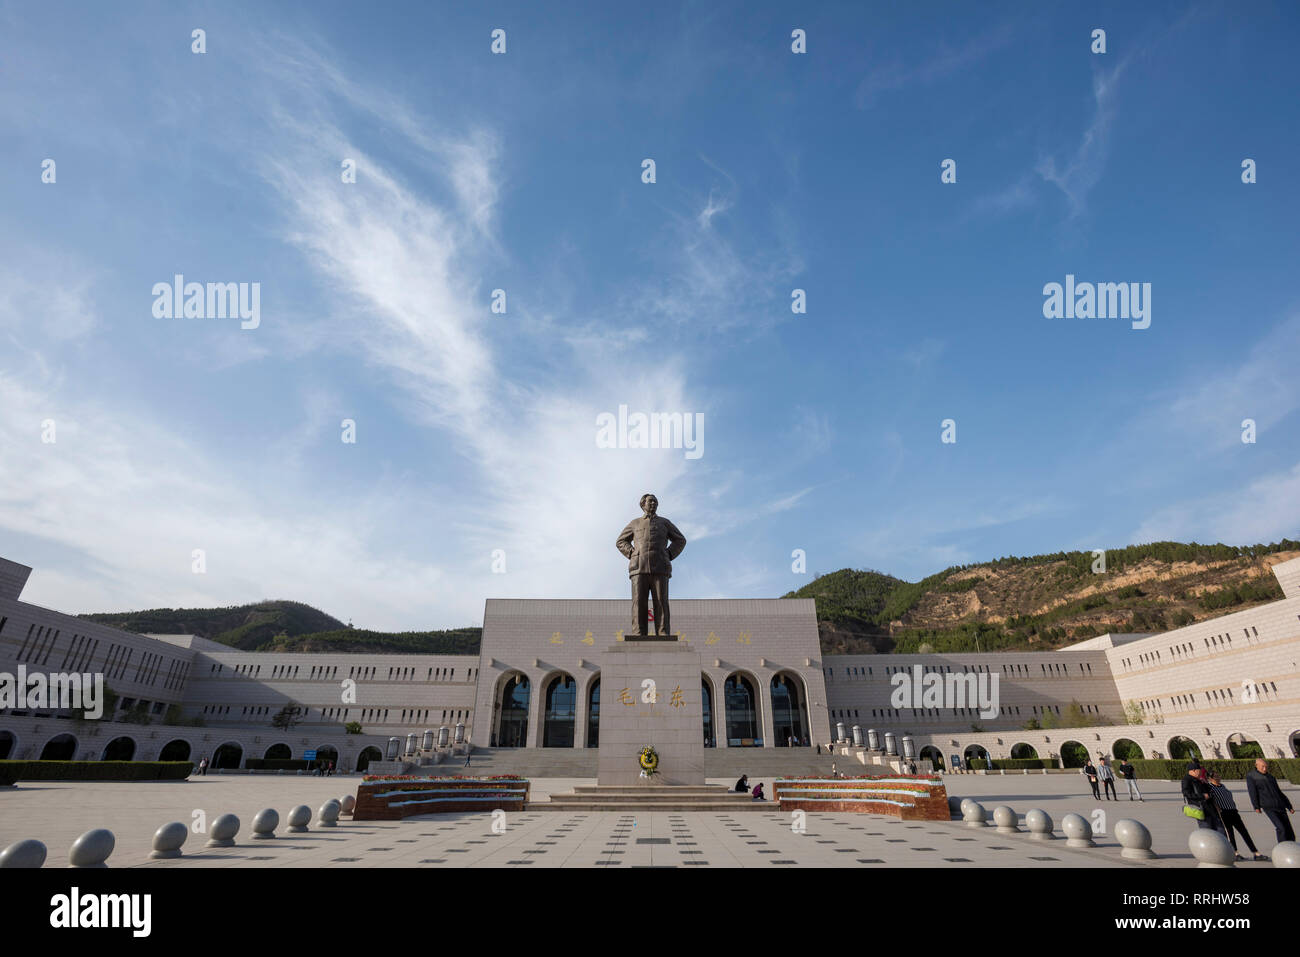 Yanan Revolutionary Memorial Hall, Yan'an, province du Shaanxi, Chine, Asie Banque D'Images